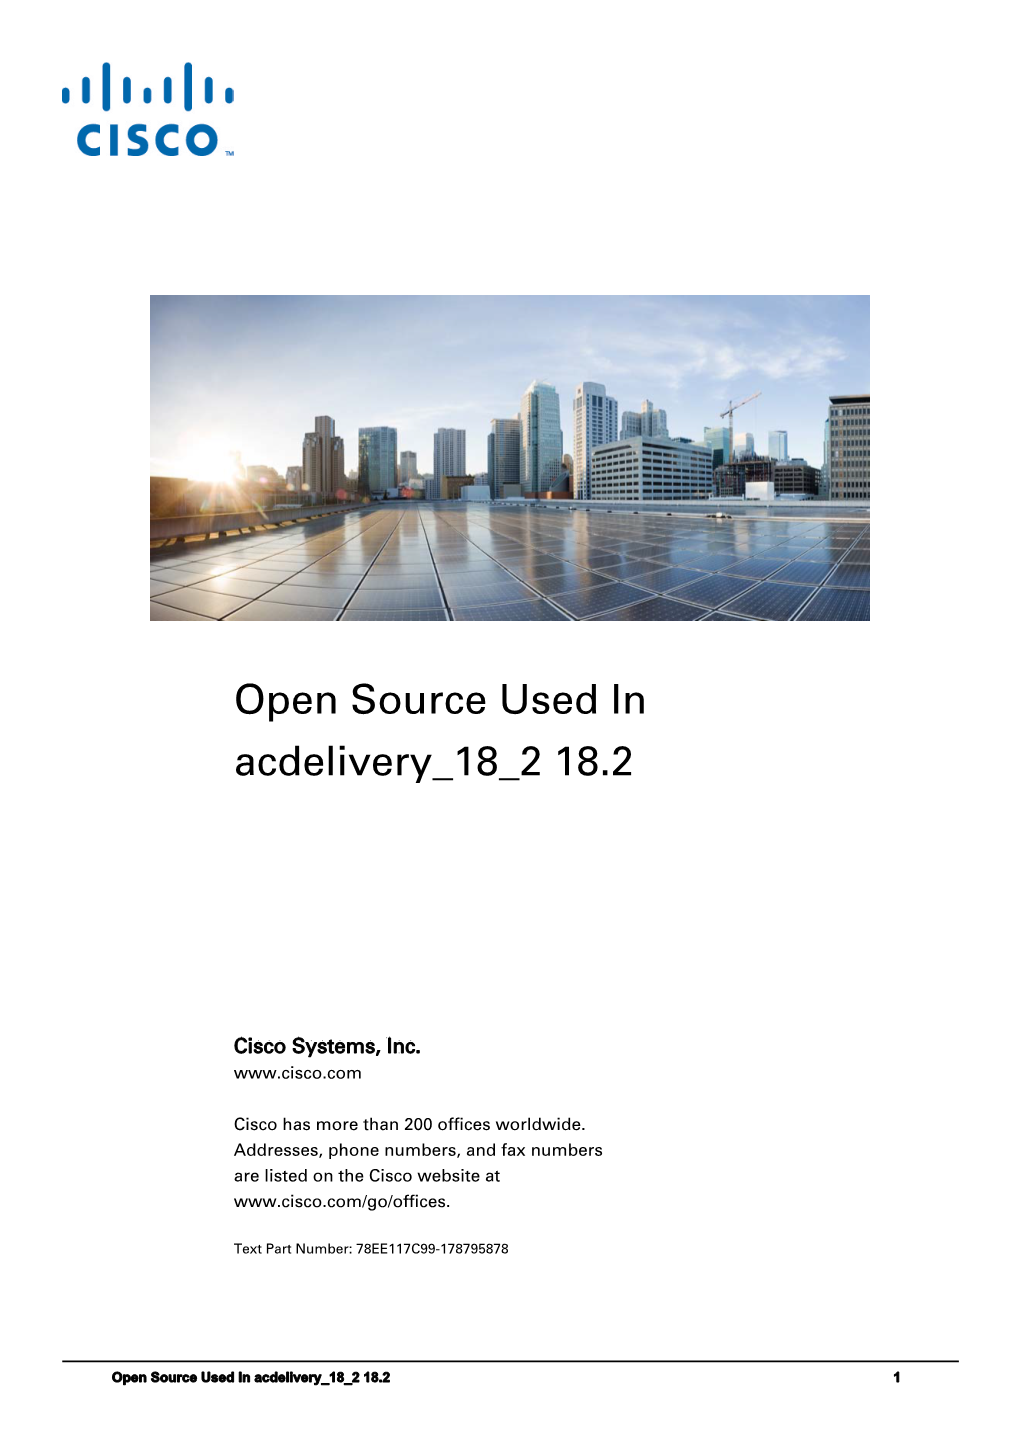 Open Source Used in Acdelivery 18 2 18.2